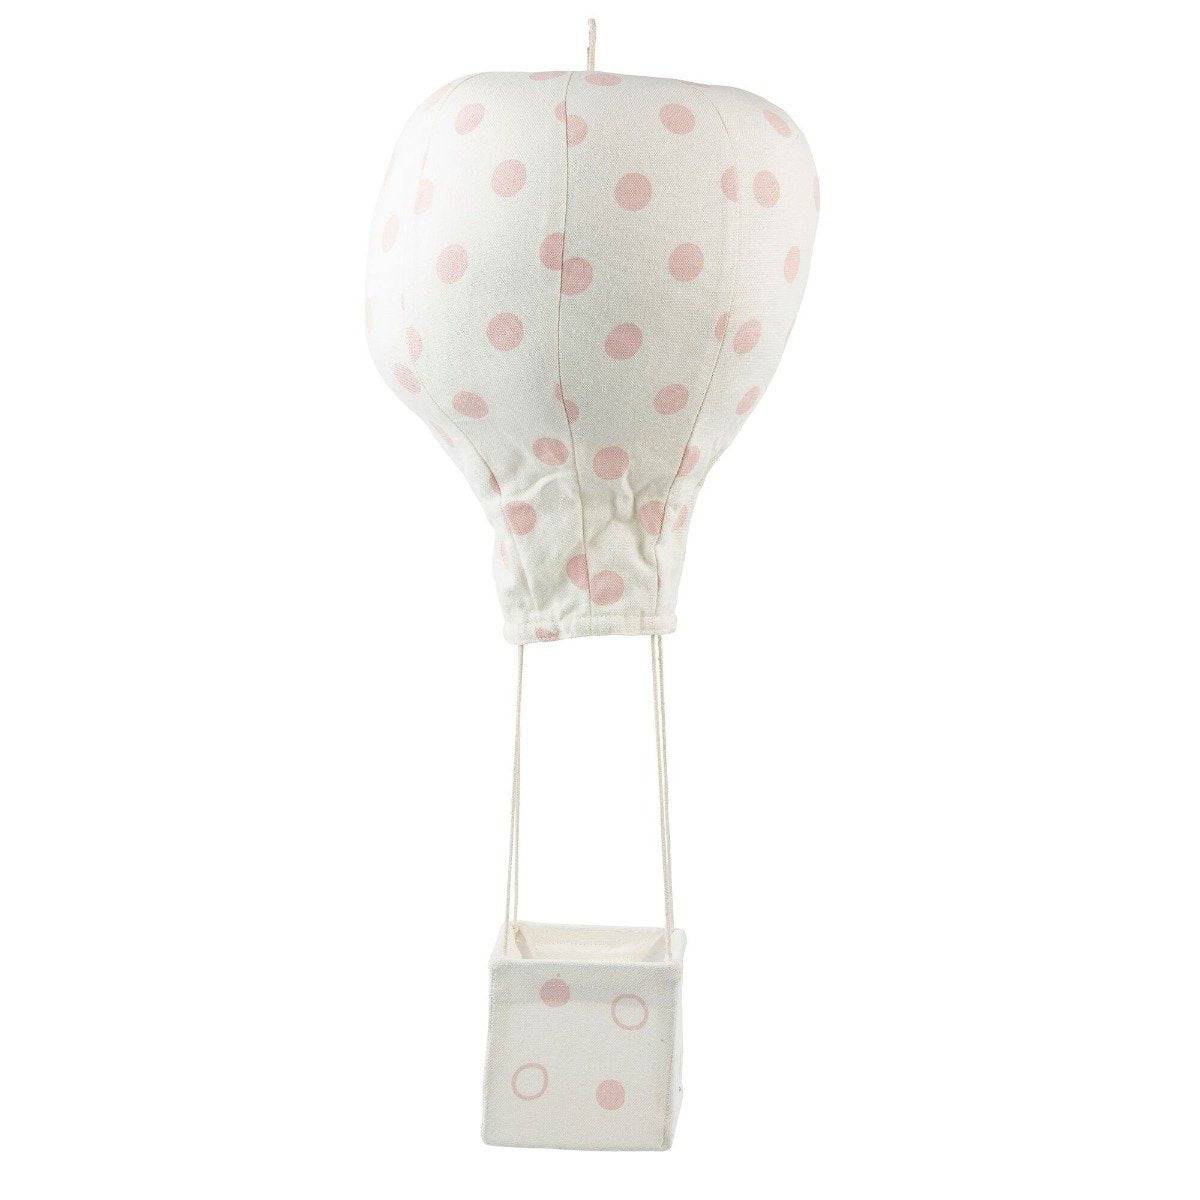 Lil' Polka Dot Hot Air Balloon Mobile in Light Pink - Twinkle Twinkle Little One